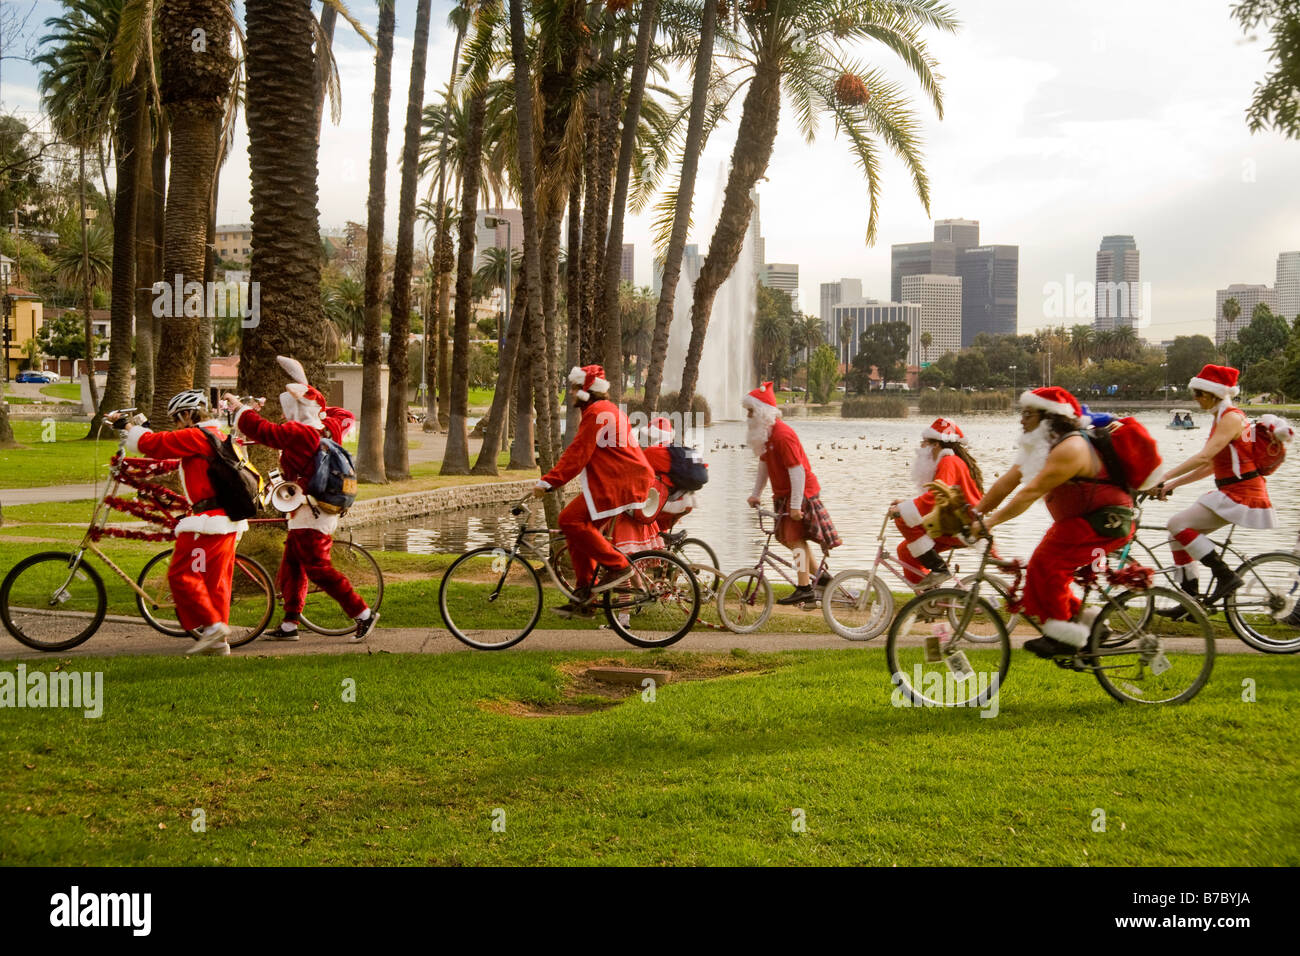 People in Santa Claus costumes bicycling in Los Angeles Stock Photo